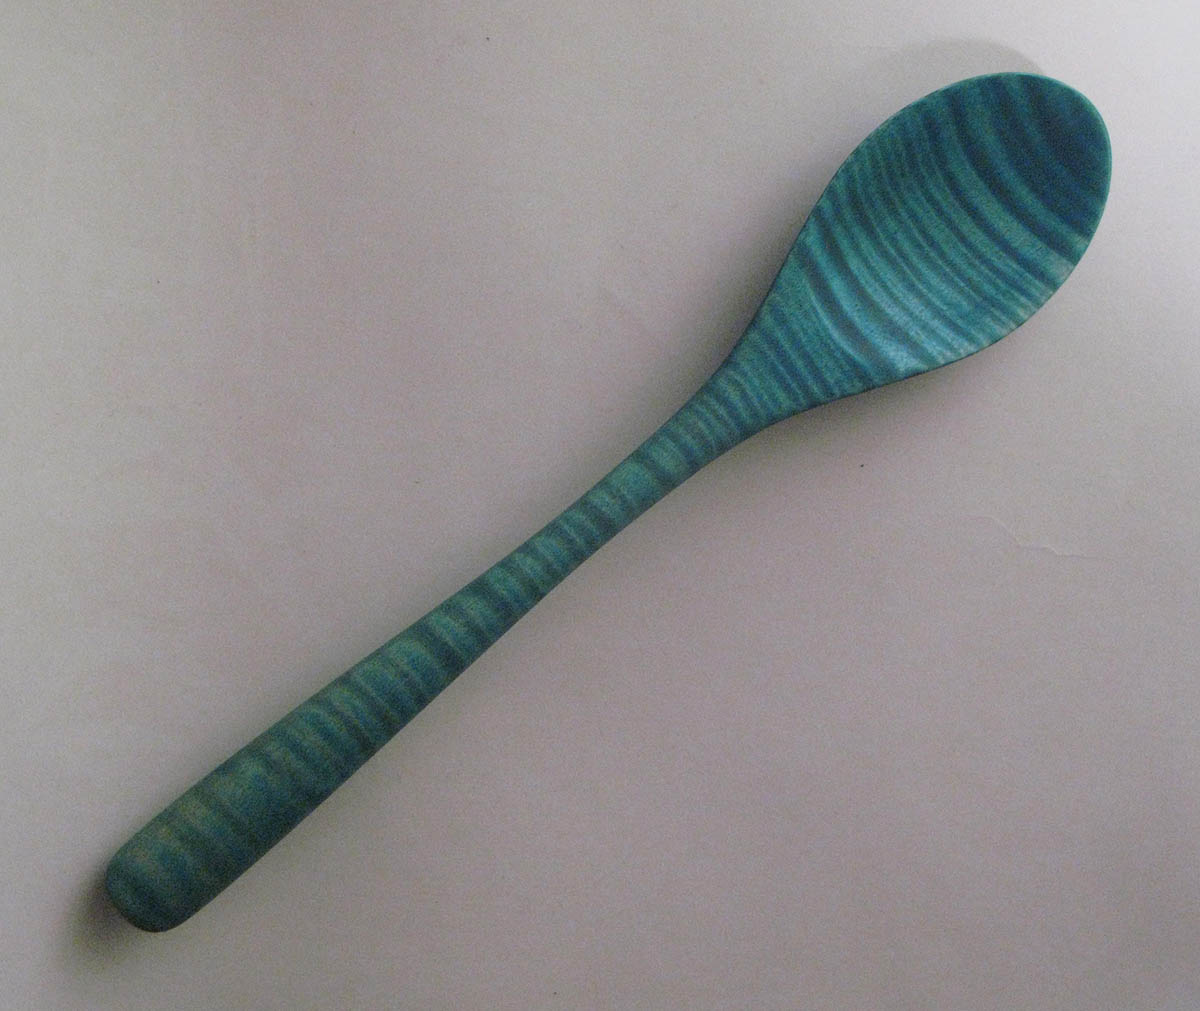 Blue wooden spoon by Ted Kelchner.